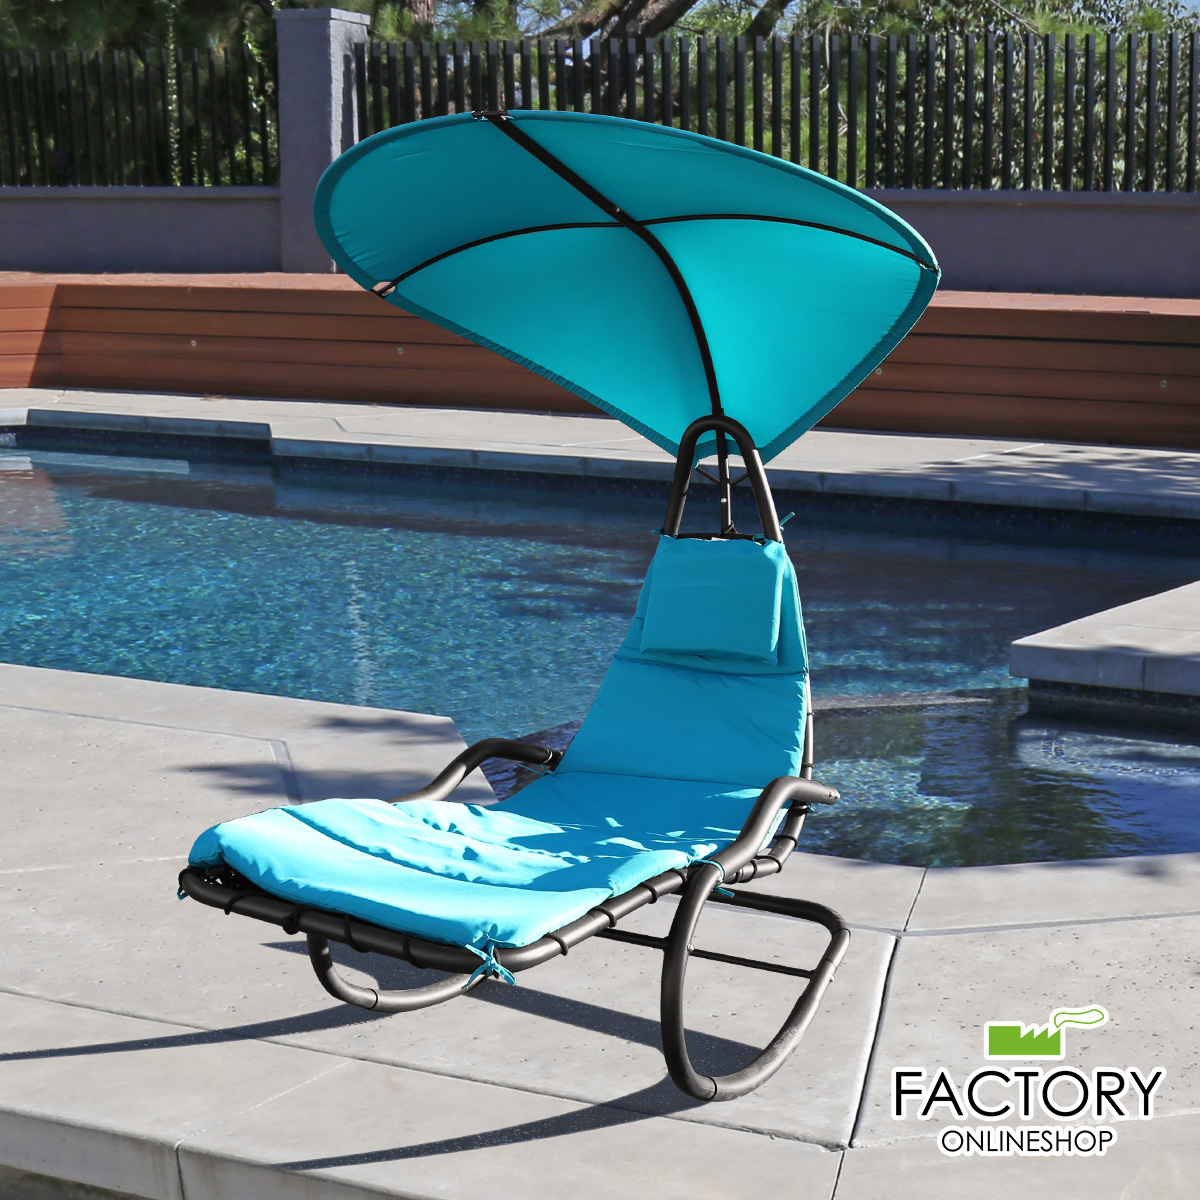 Rocking Hanging Lounge Chair - Curved Chaise Rocking Lounge Chair Swing For Backyard Patio w/ Built-in Pillow Removable Canopy with stand {Blue} - image 1 of 8